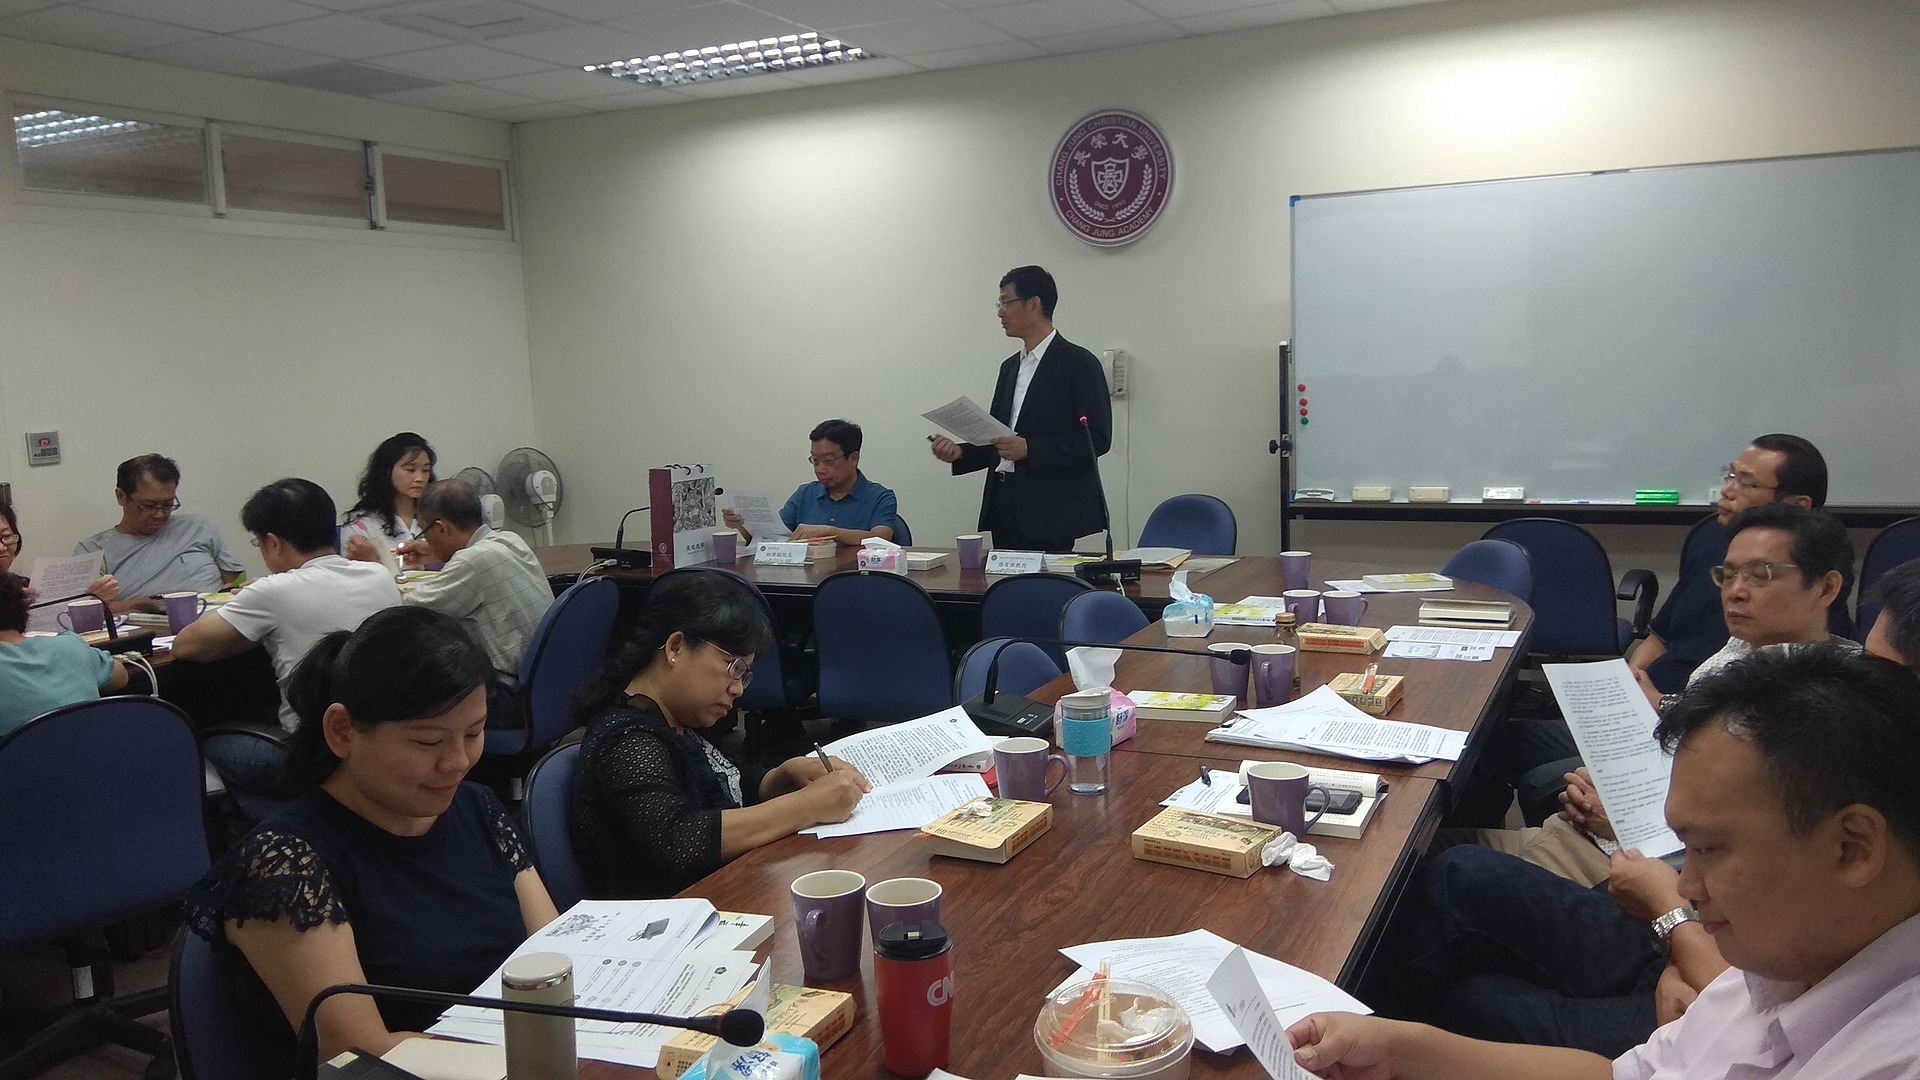 Management School Hold Ethic and Social Responsibility Teaching Workshop to fulfill Ethic Teaching